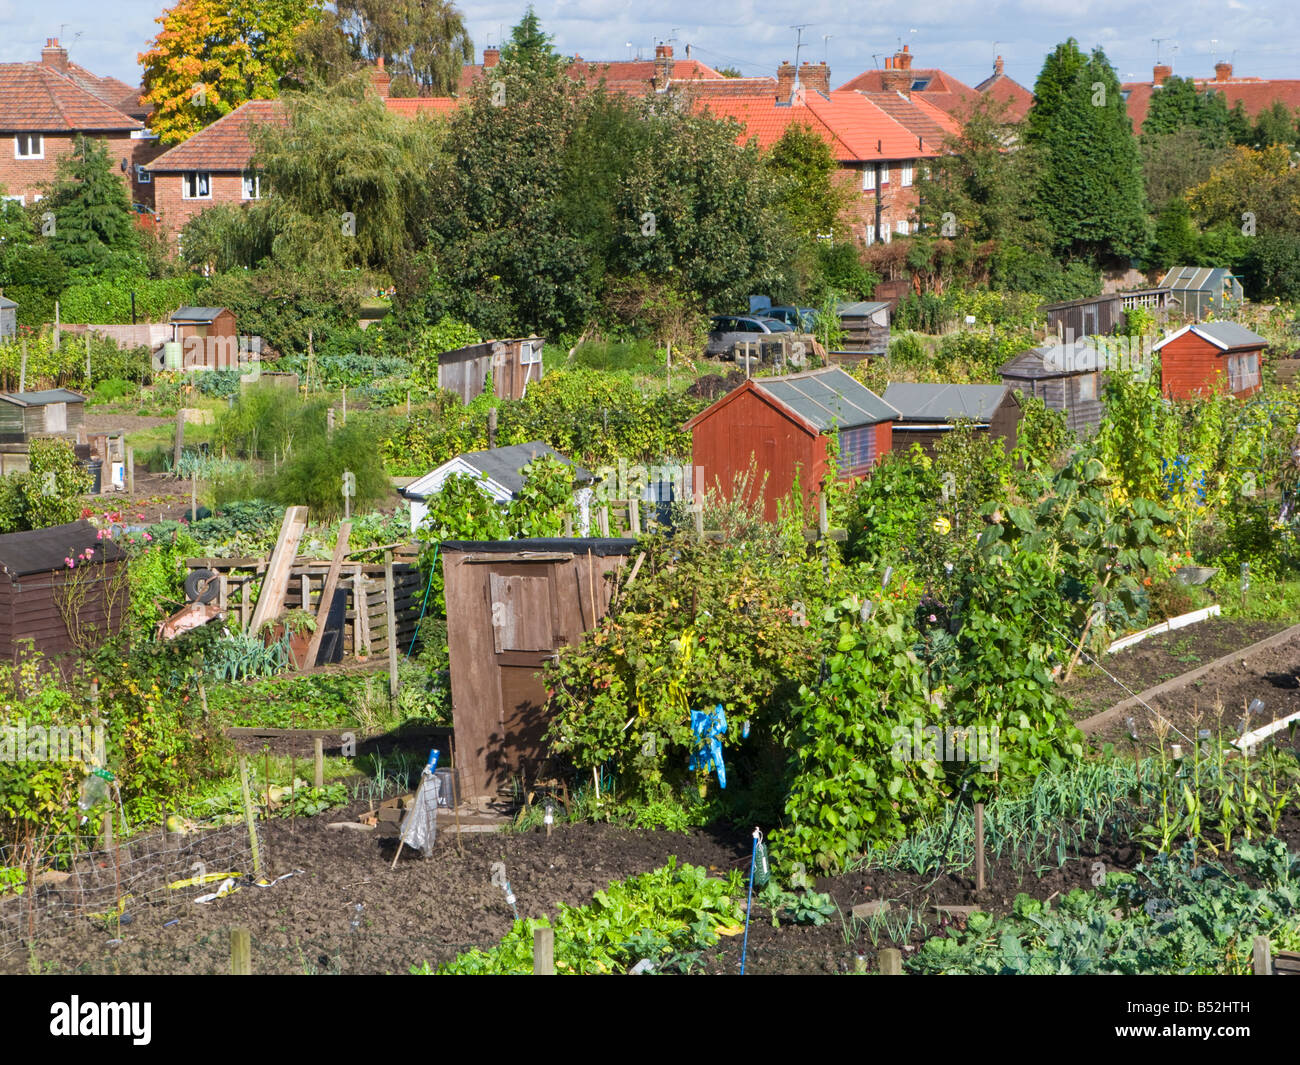 Allotments with sheds, England, UK Stock Photo